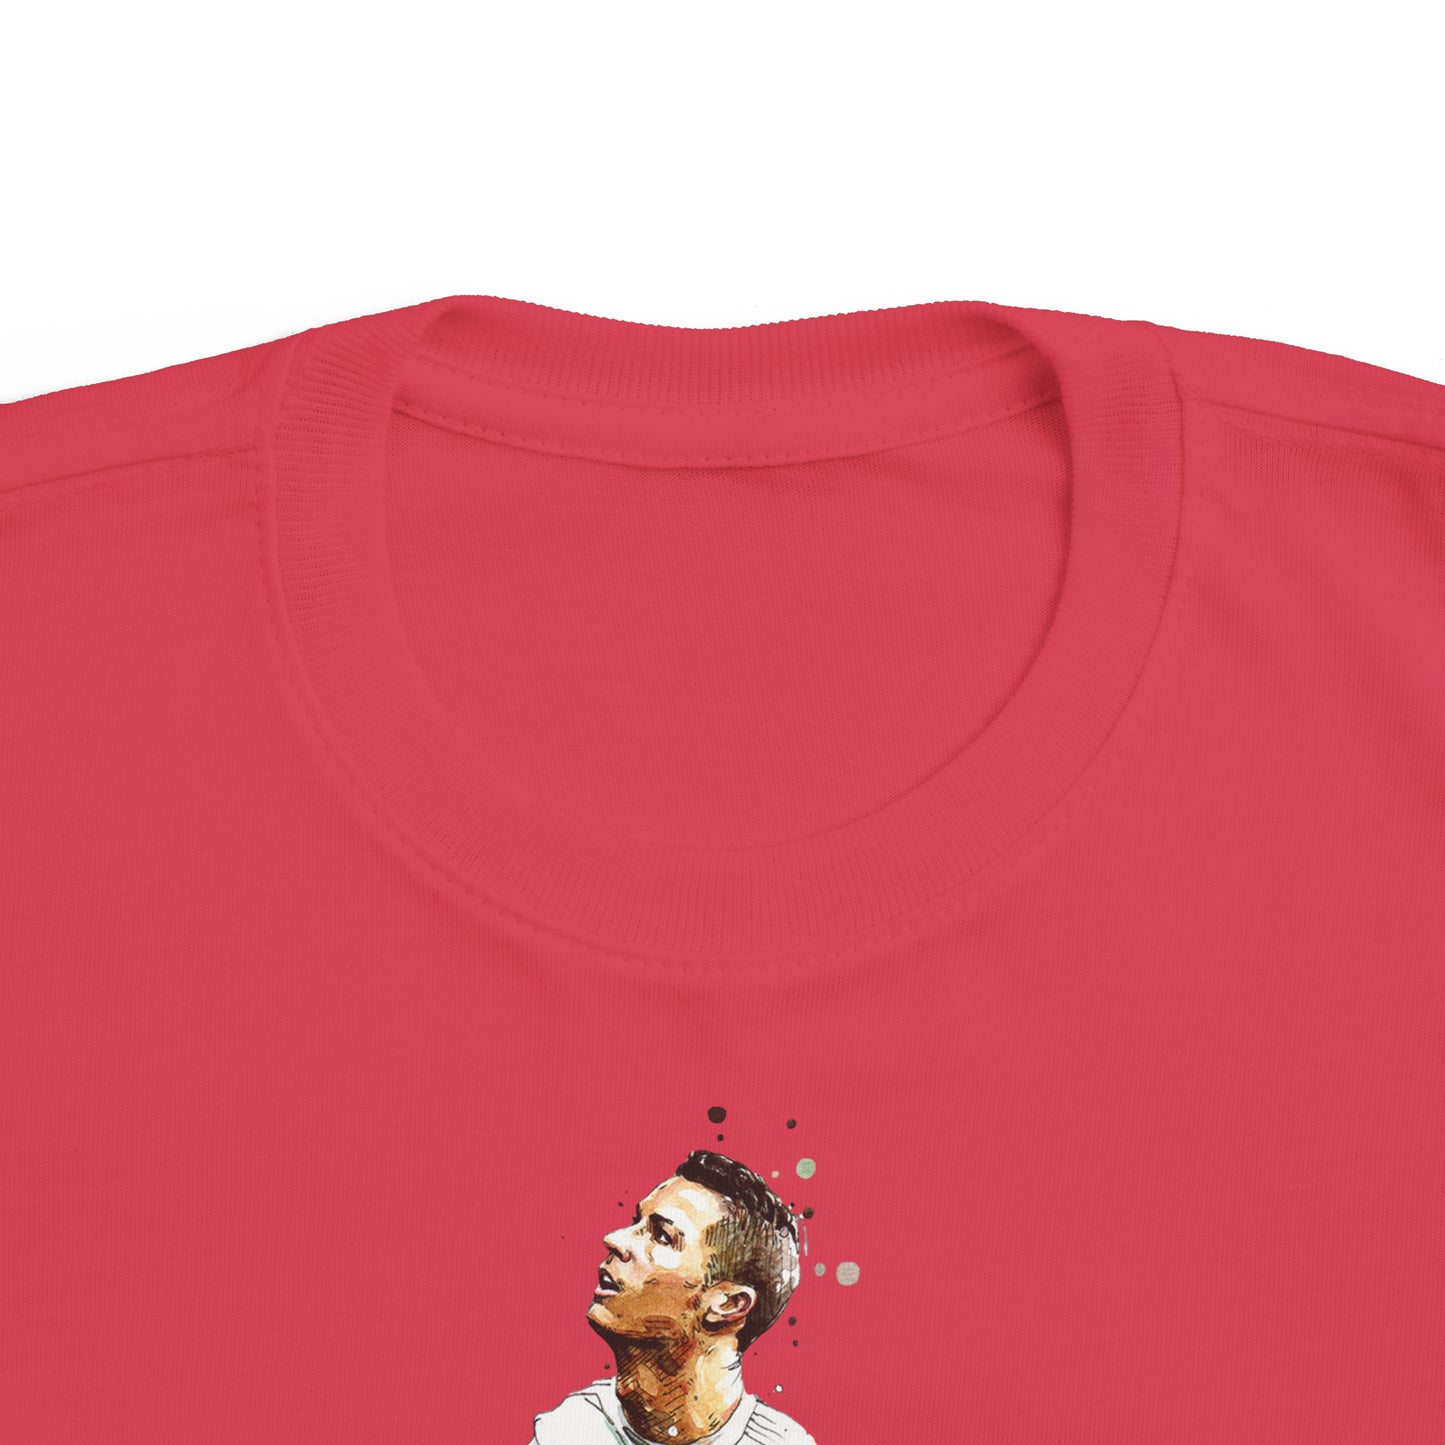 CR7 I am here Celebration Toddler's Fine Jersey Tee